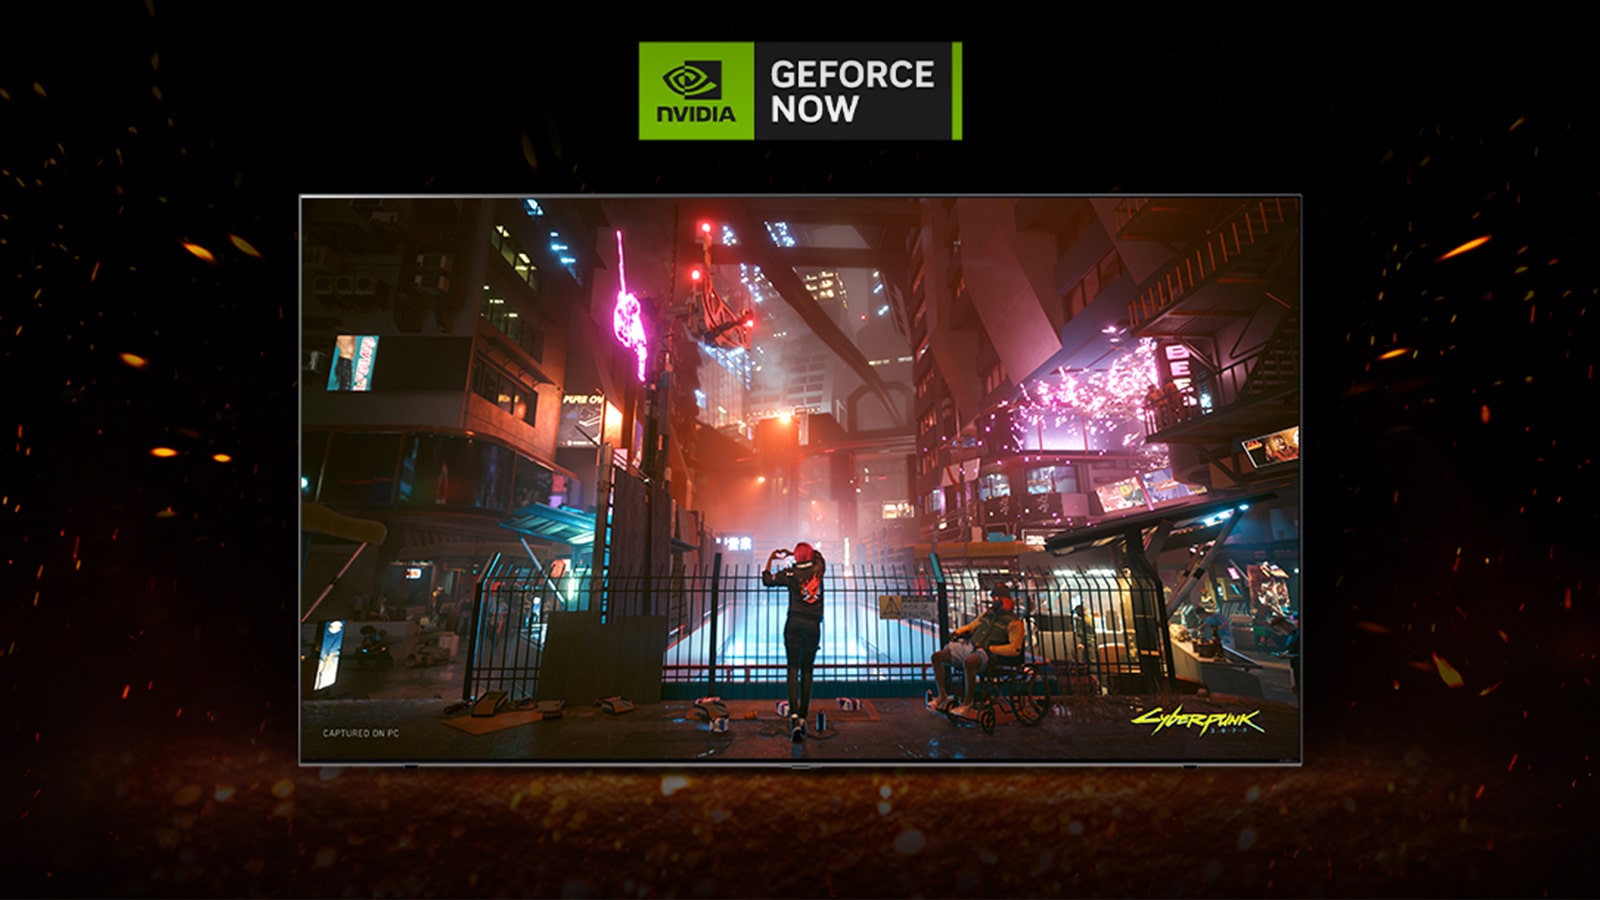 Image showing GeForce NOW on LG UHD TV, featuring shows and games.